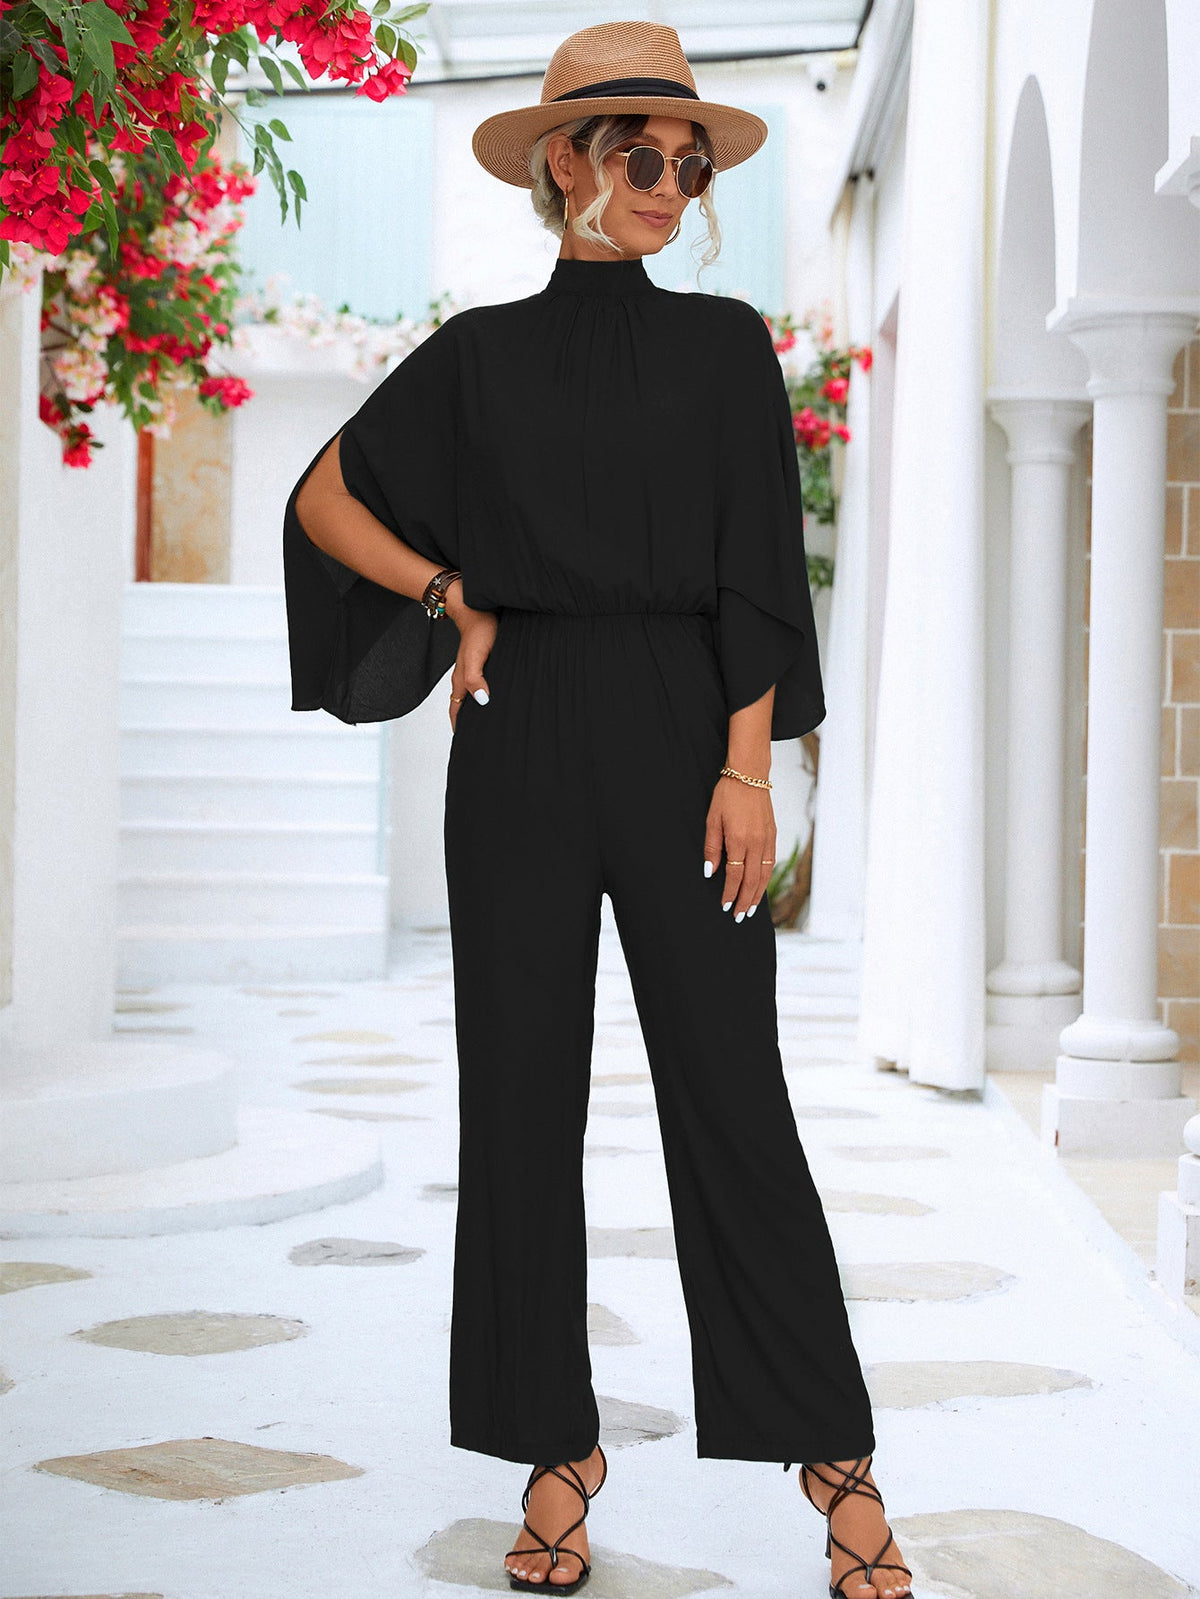 Draped In Style Caped Jumpsuit - black caped jumpsuit with a mock neck and split quarter sleeves. #Firefly Lane Boutique1